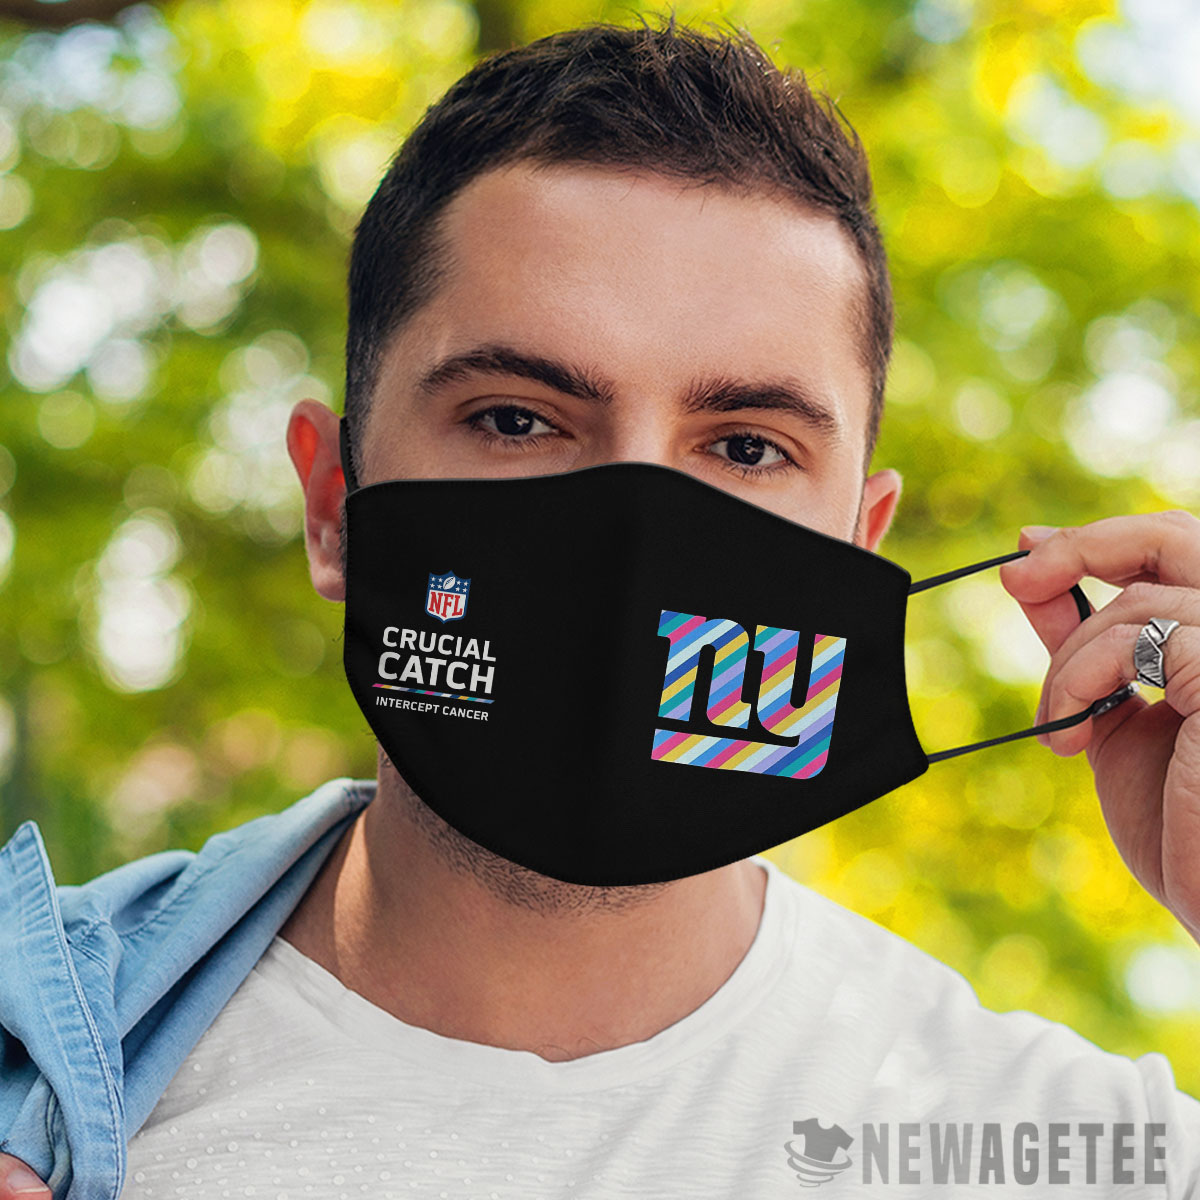 New York Giants Nfl Crucial Catch Multicolor Face Mask